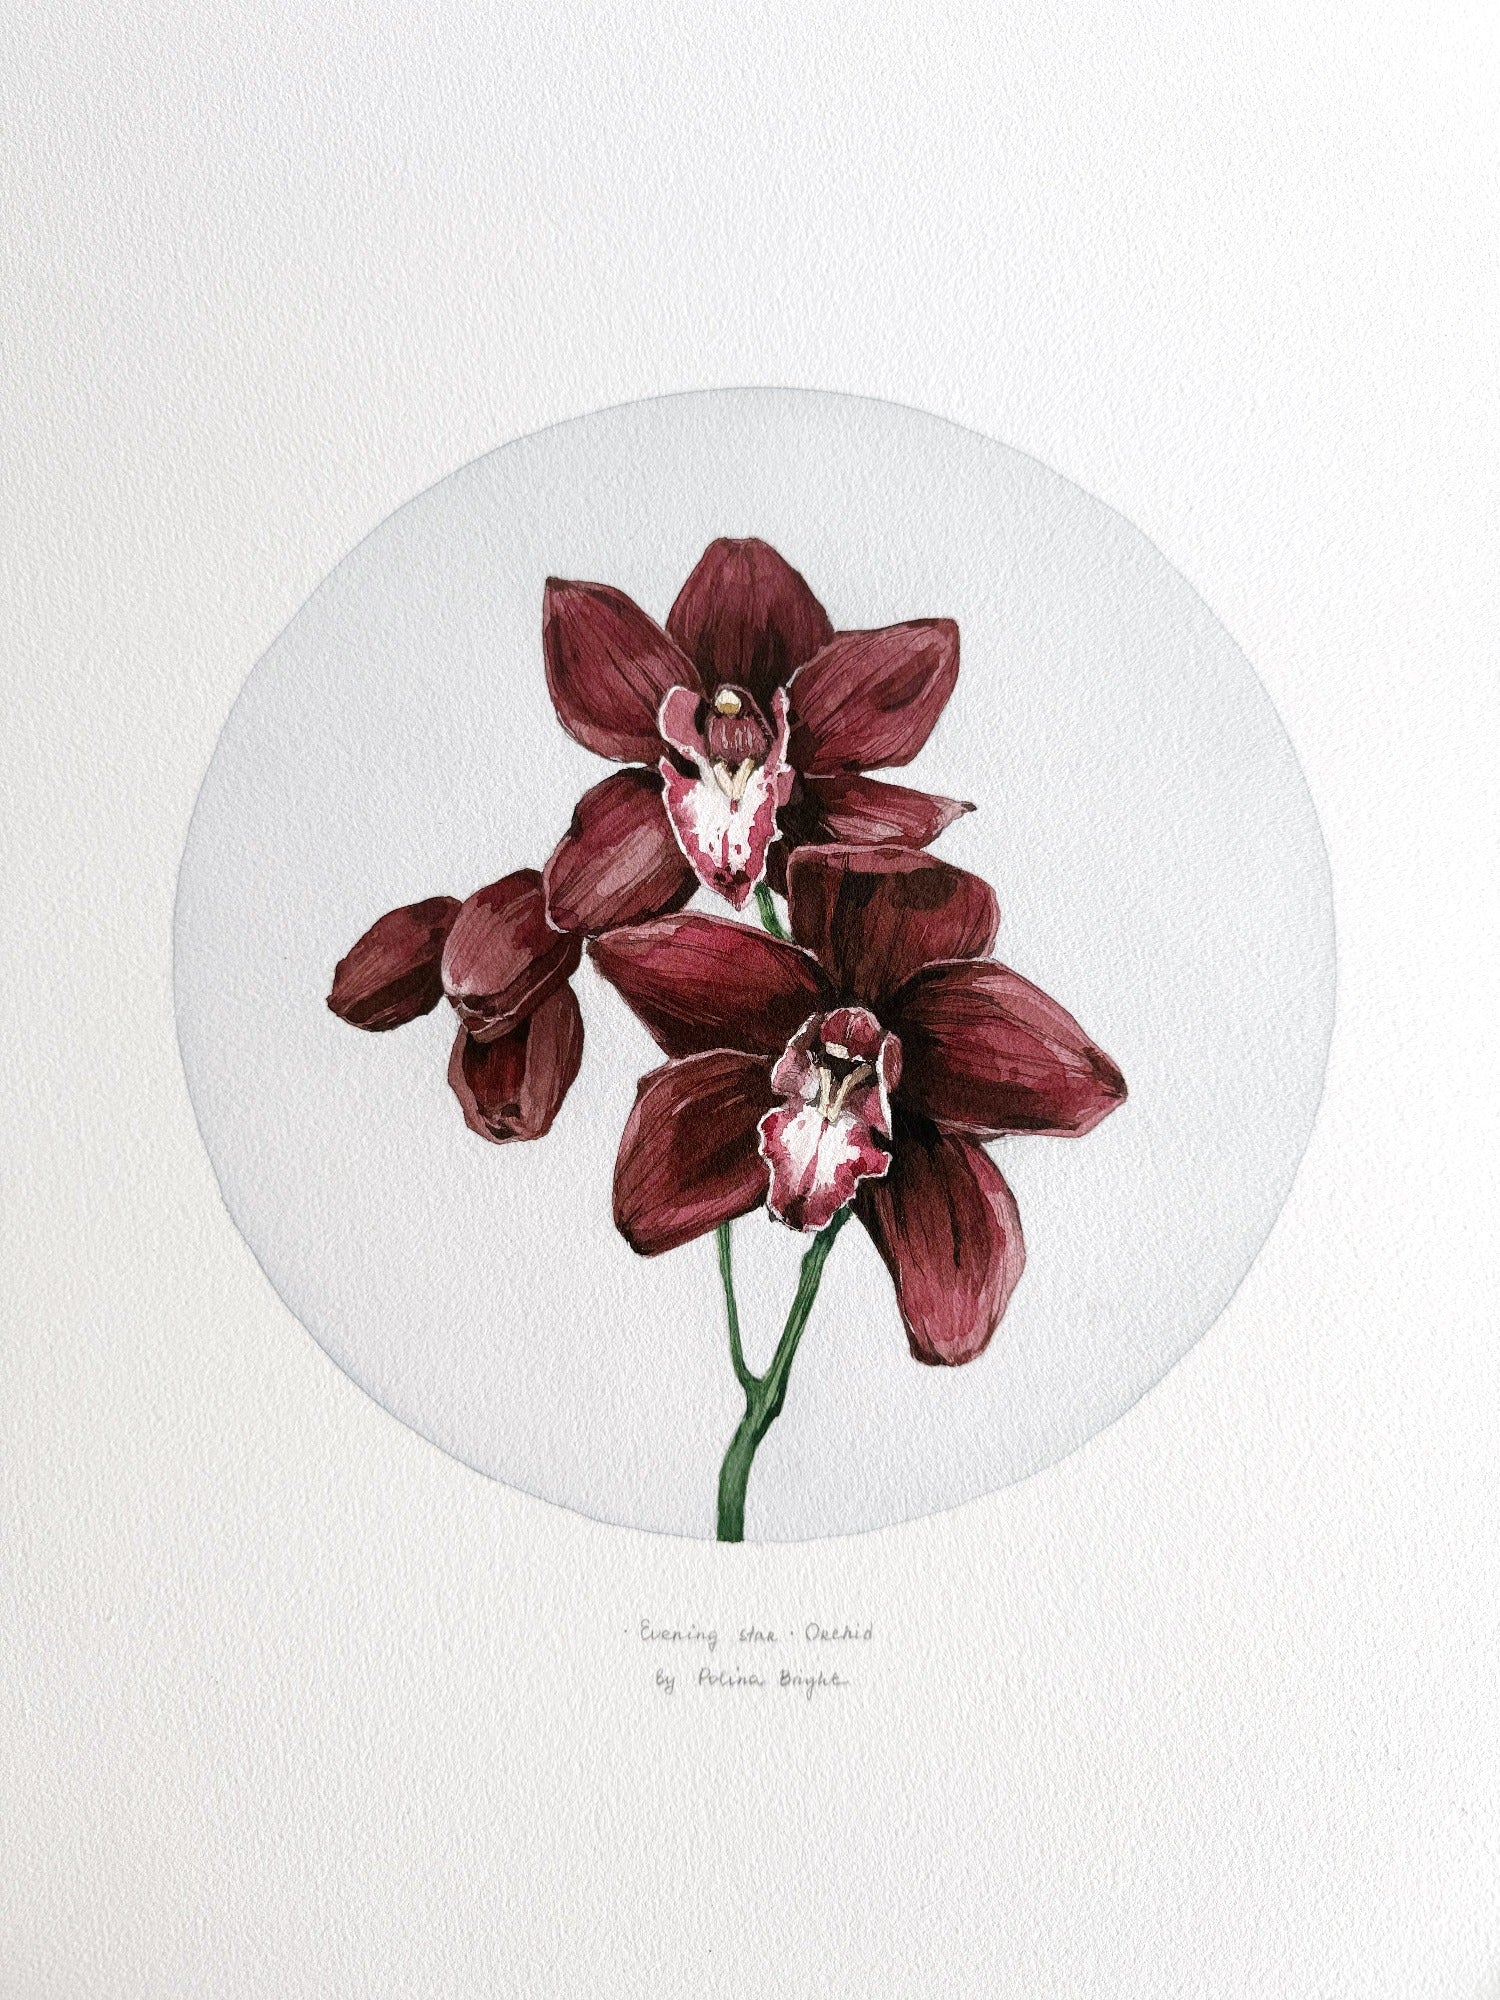 Evening star orchid - print